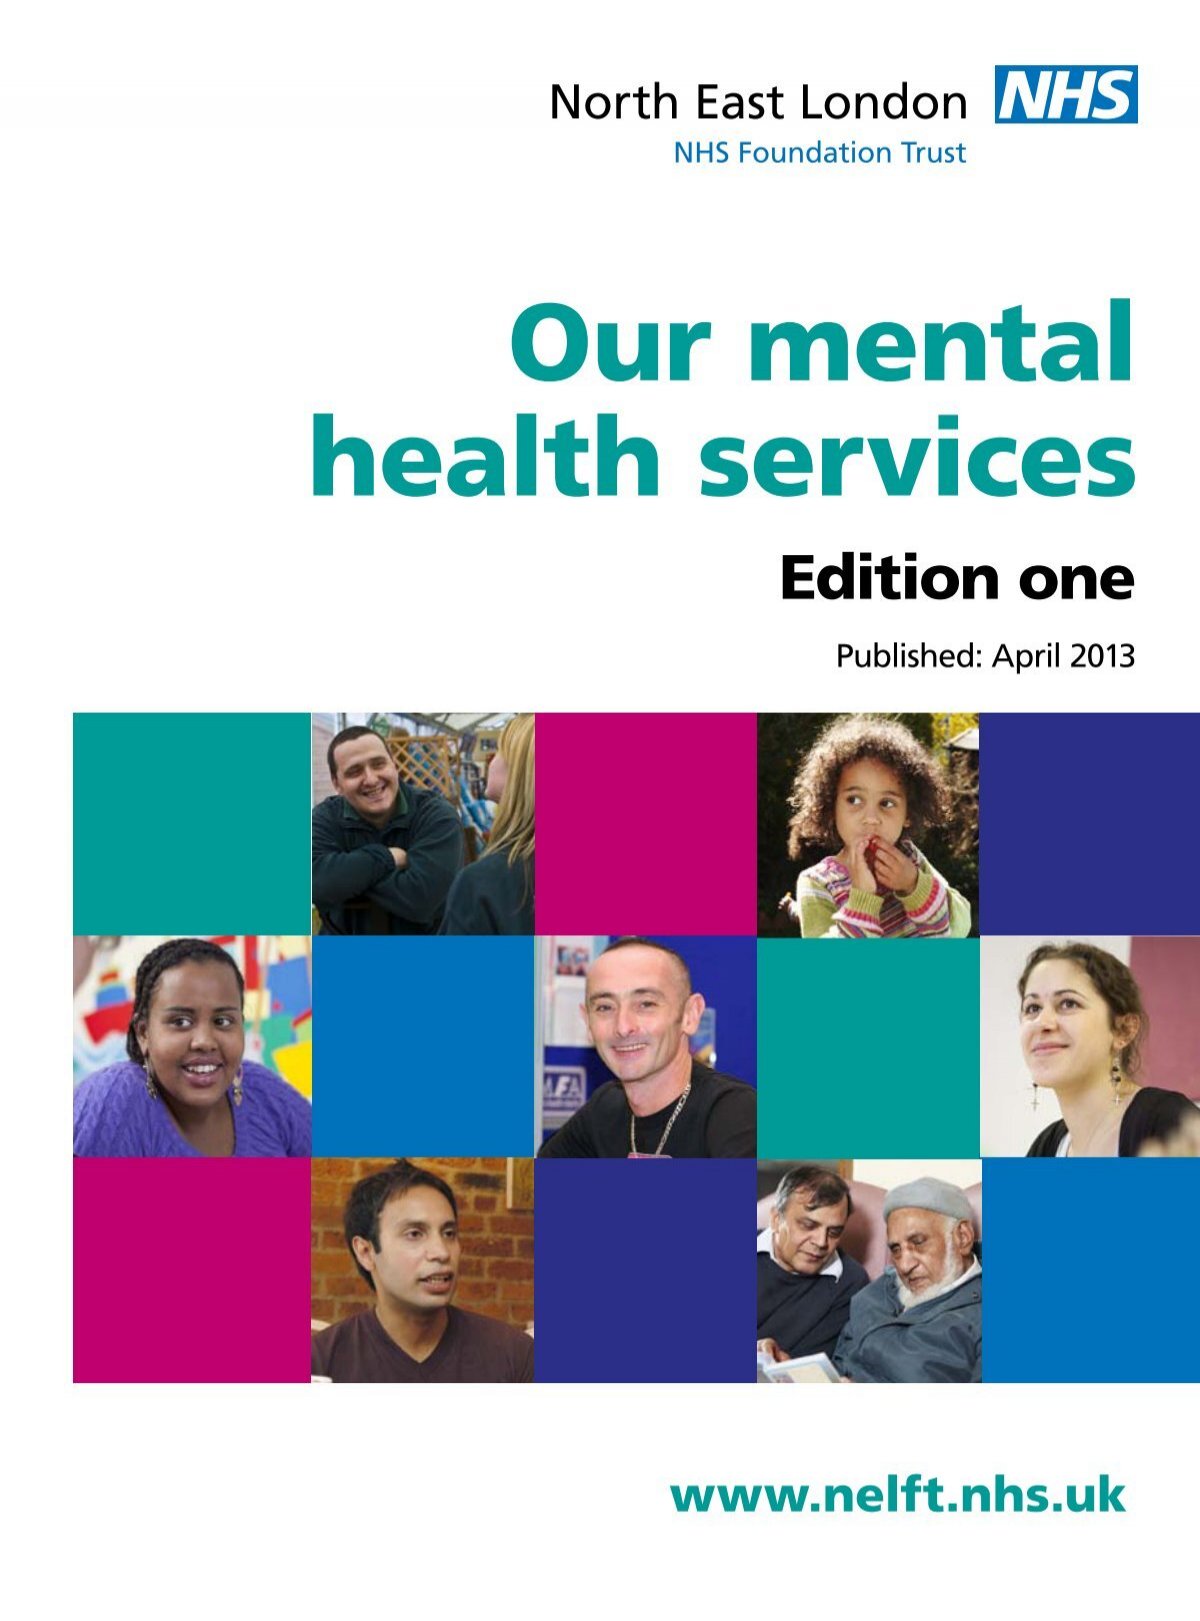 Our mental health services - North East London NHS Foundation Trust